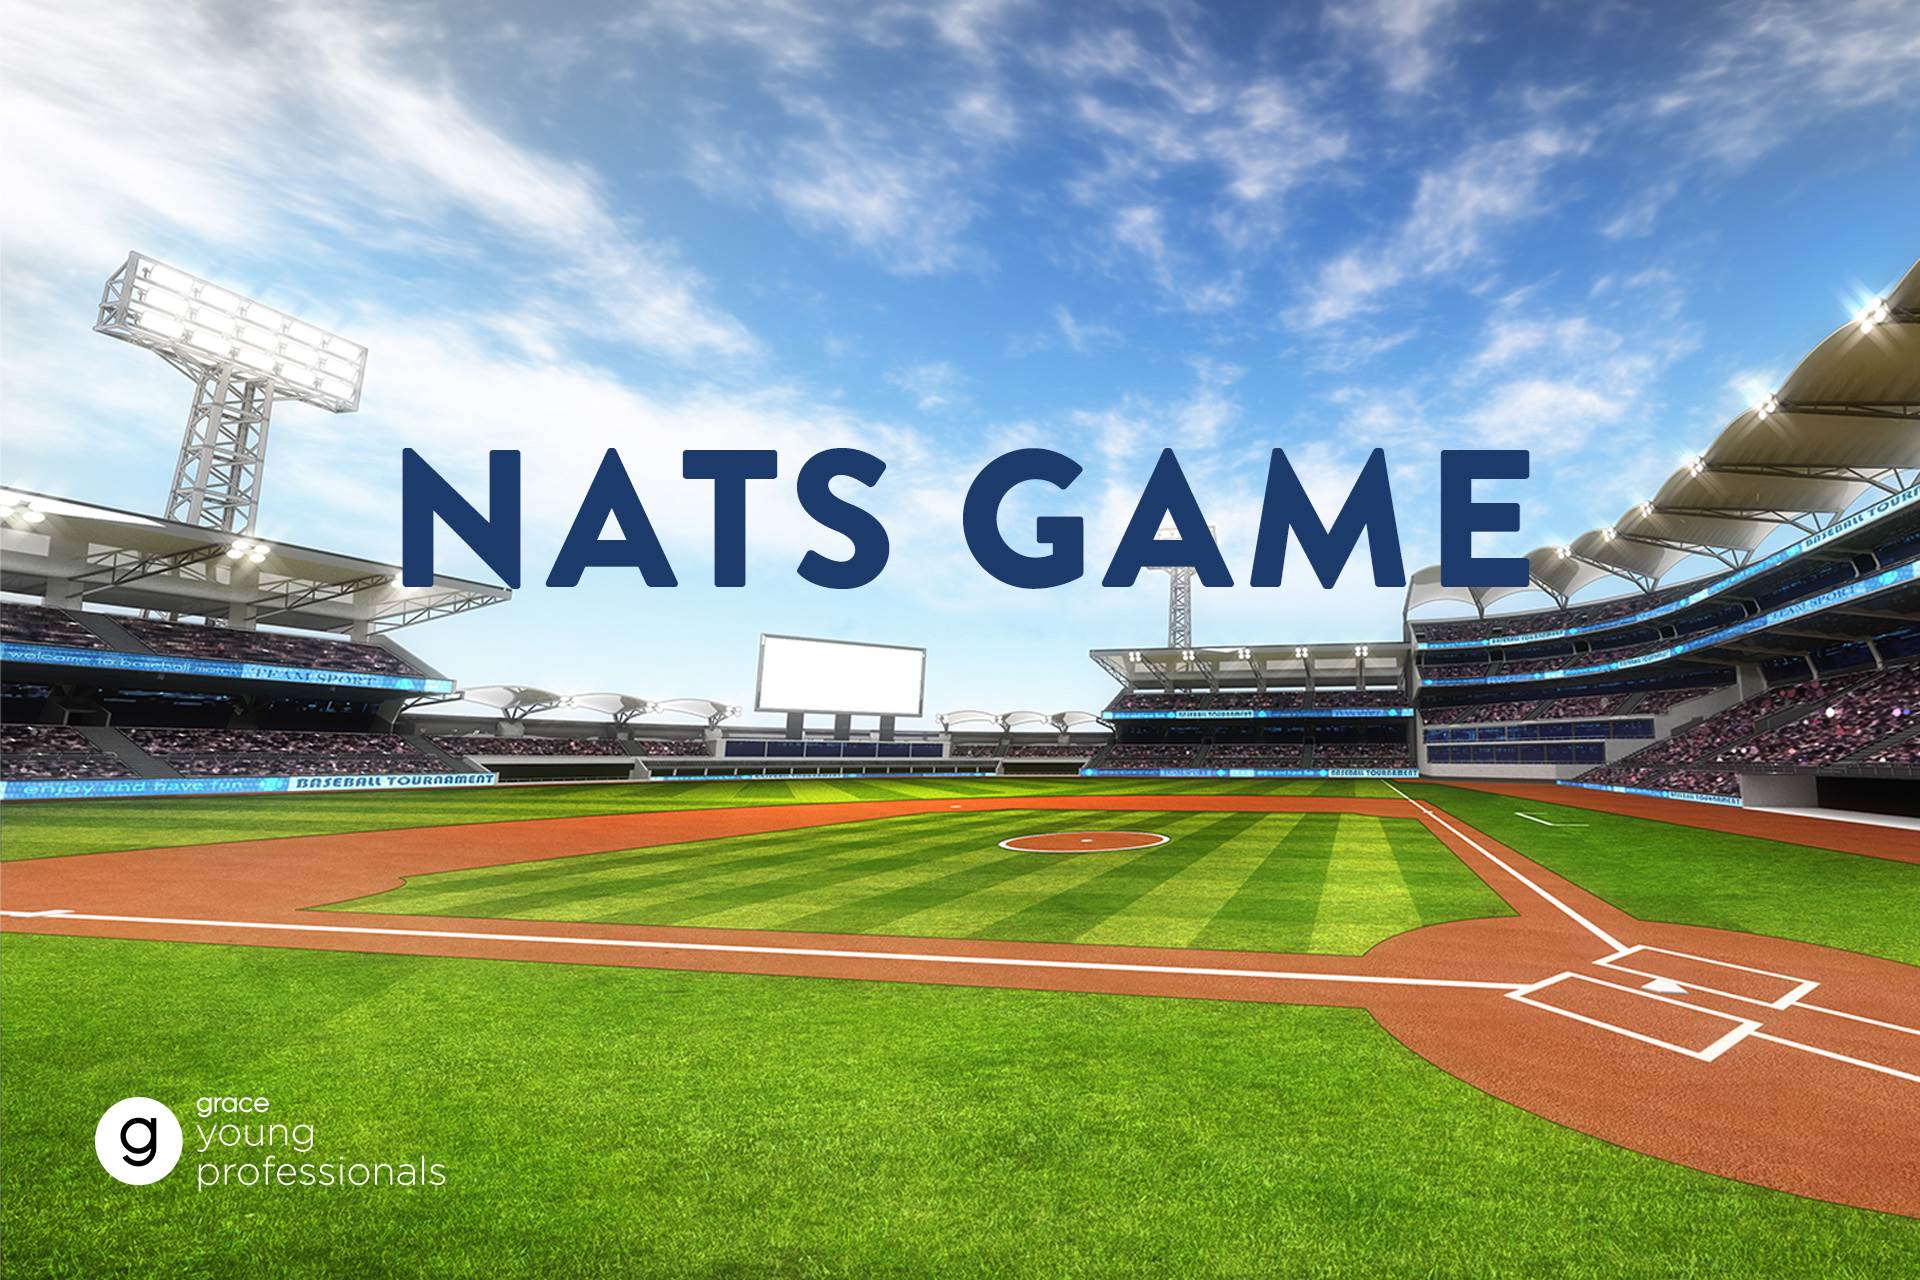 Link to Nats Game page